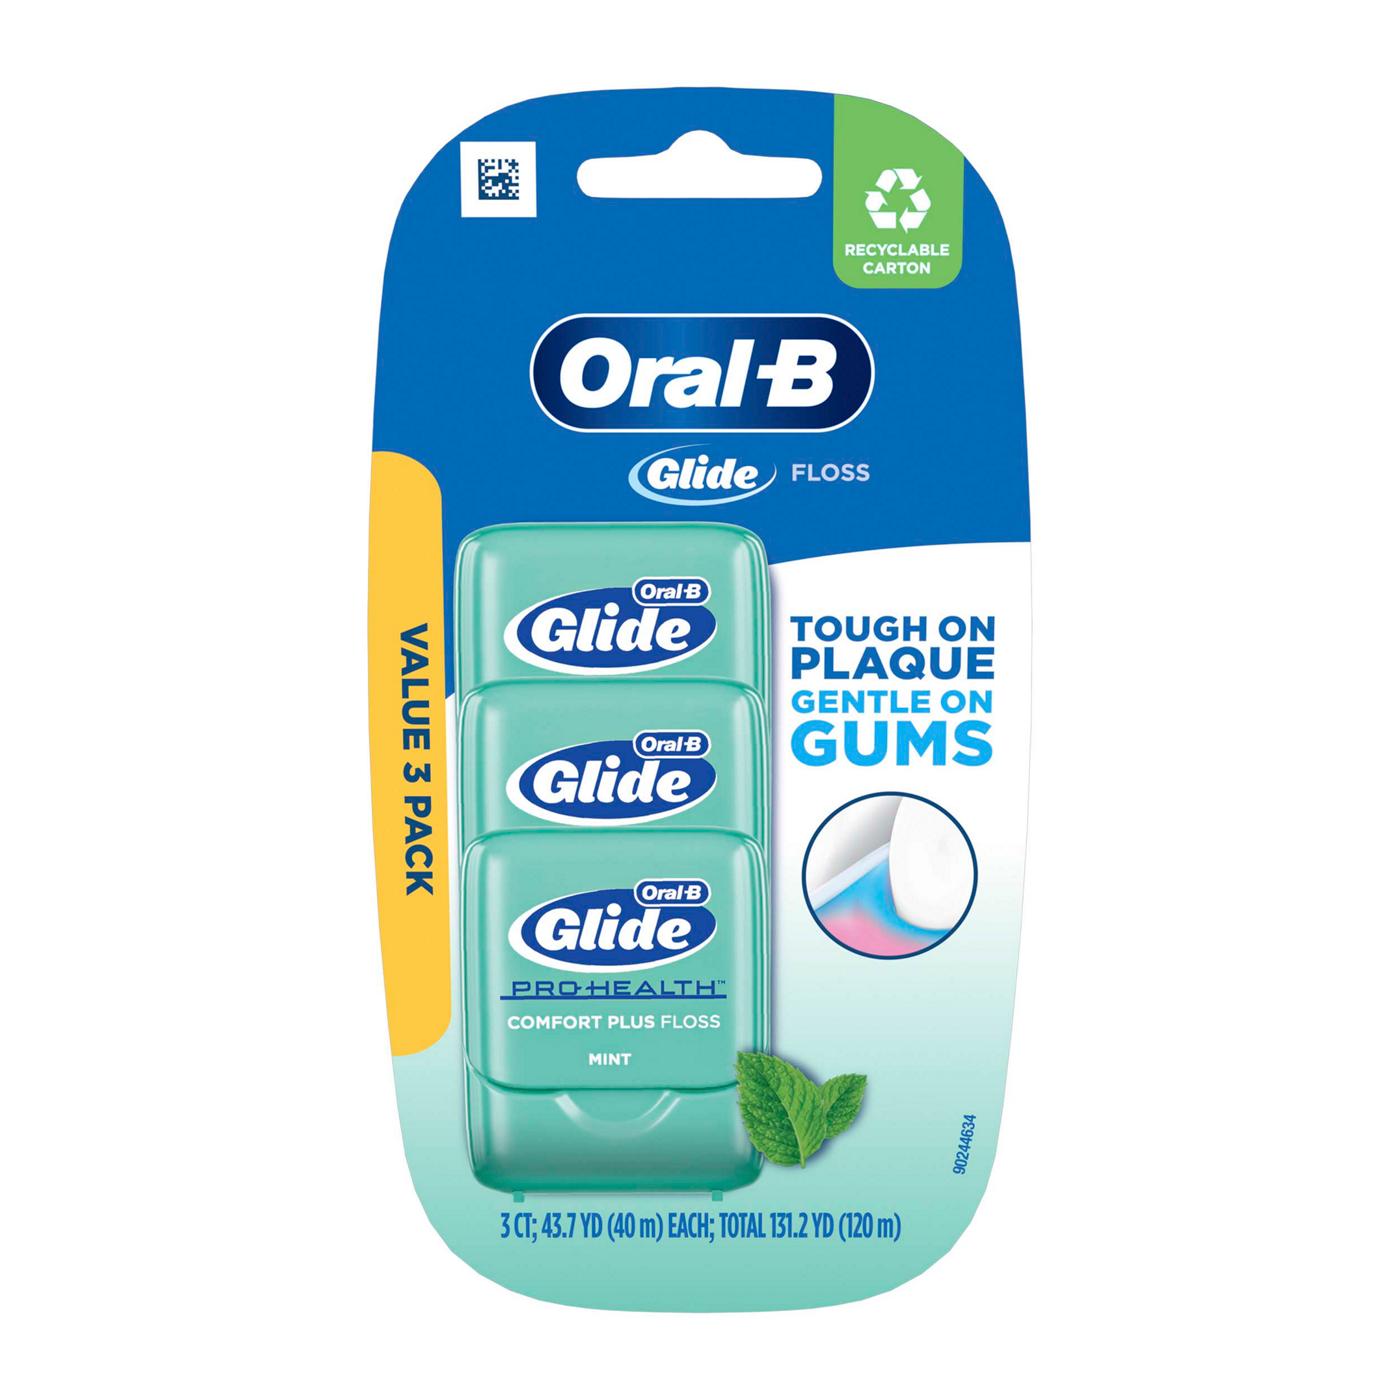 Oral-B Glide Pro-Health Comfort Plus Floss - Mint; image 1 of 3